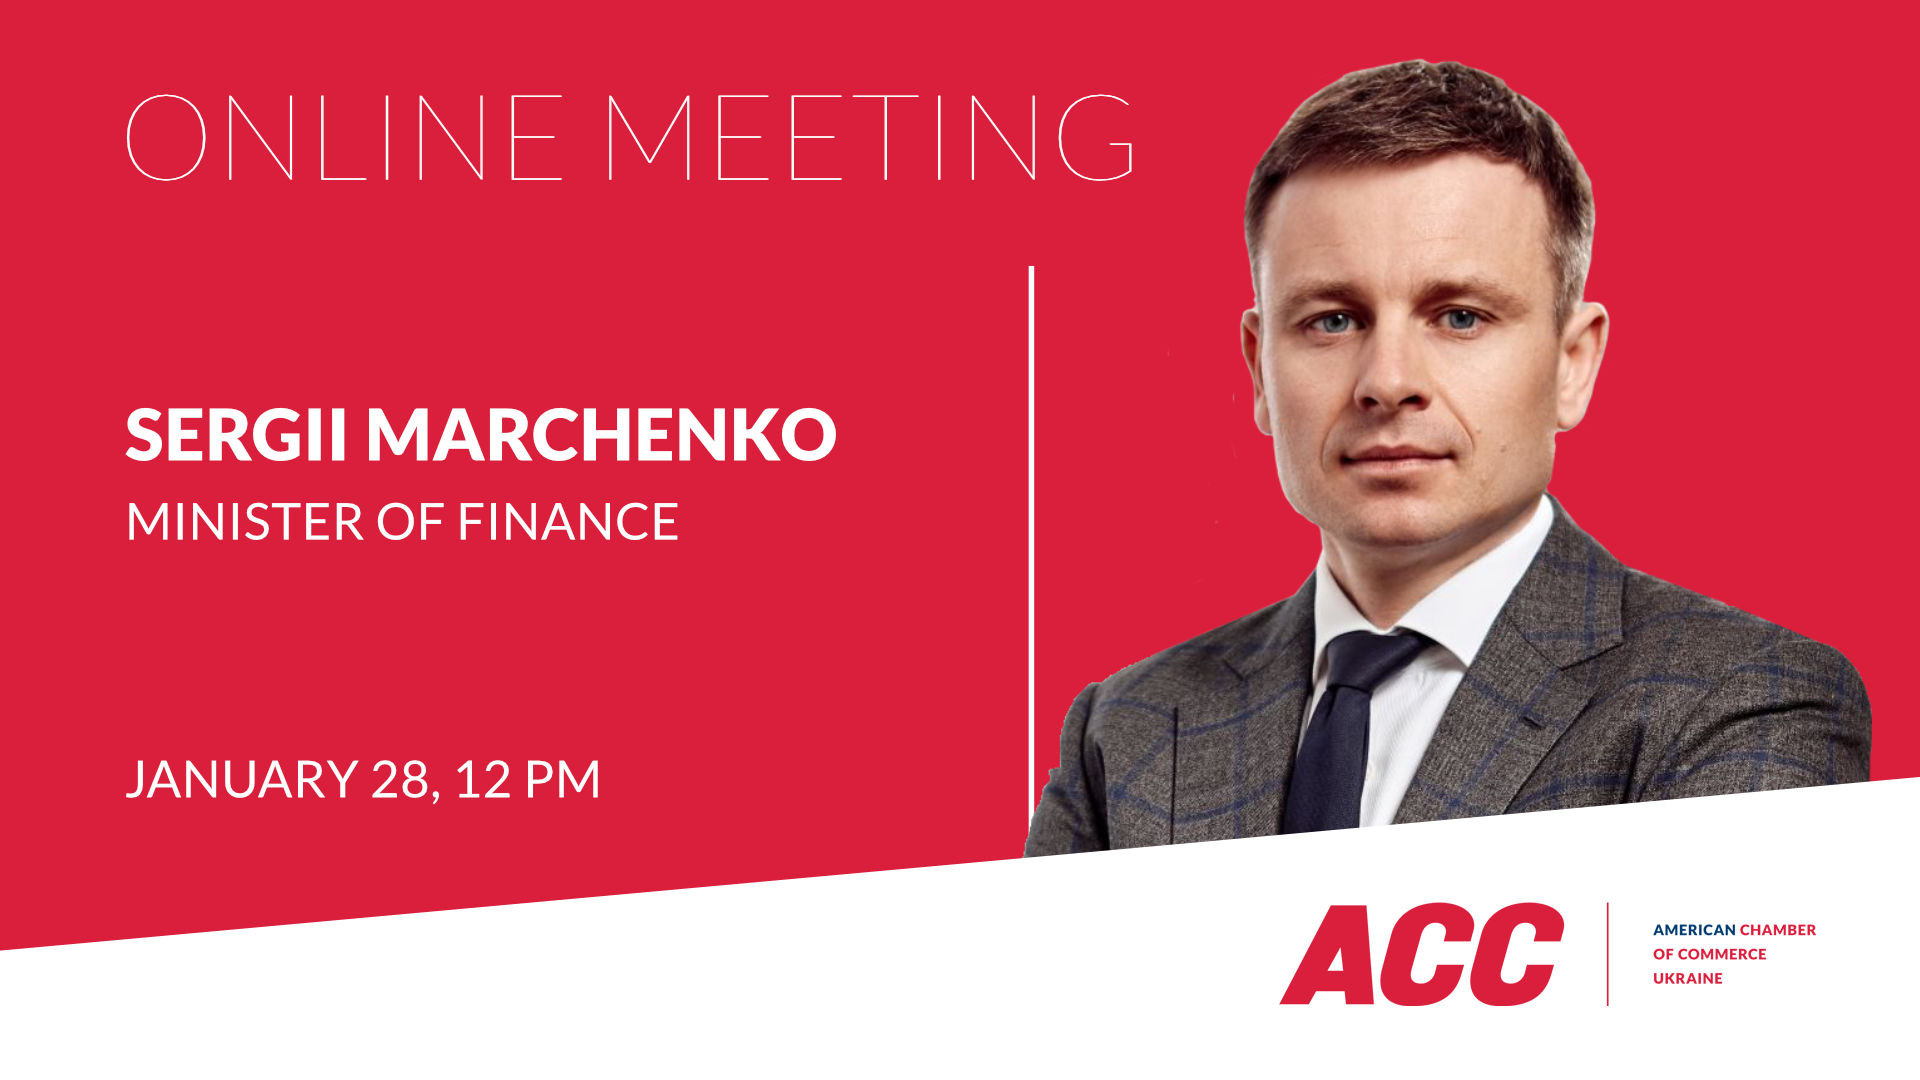 Online Meeting with Sergii Marchenko, Minister of Finance